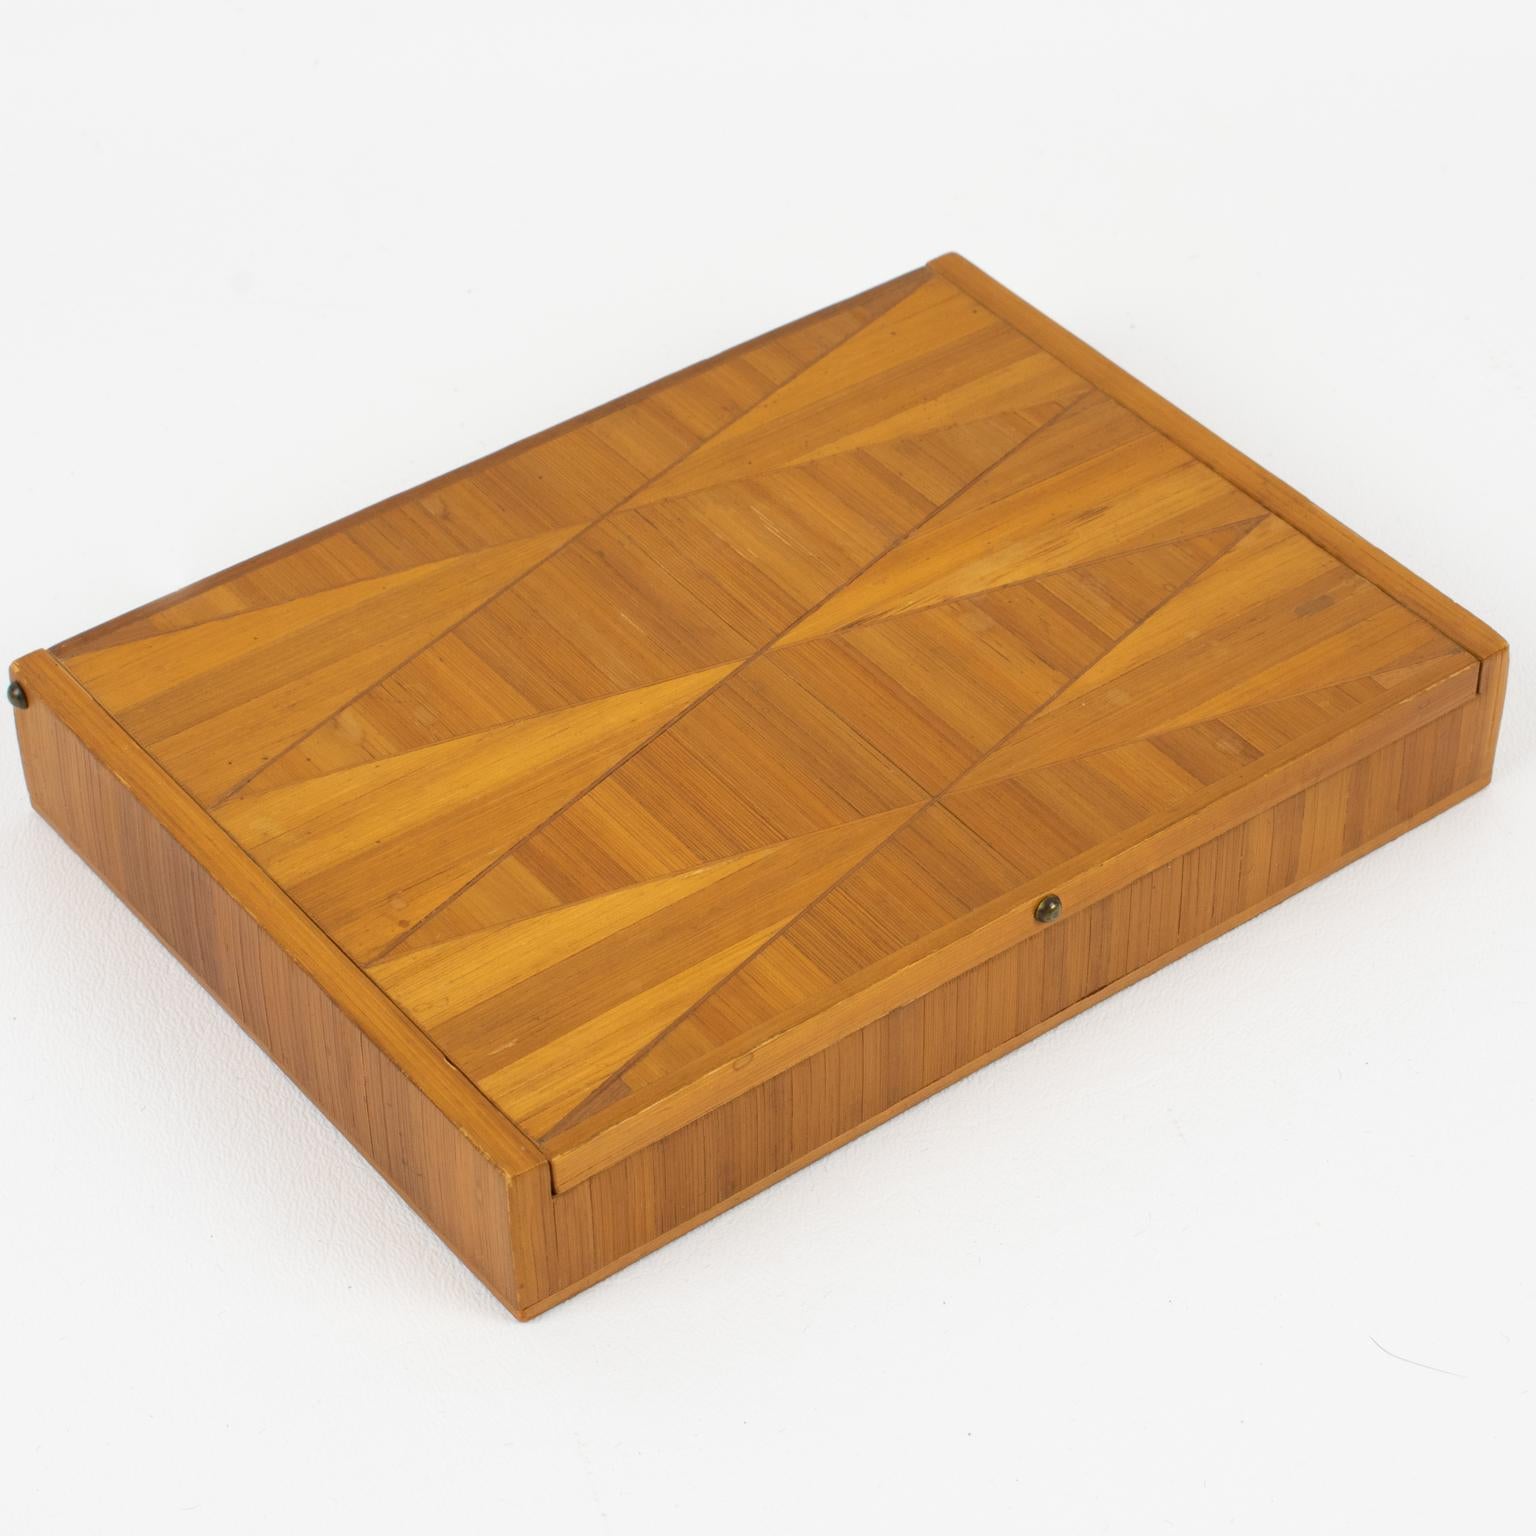 This elegant straw marquetry decorative lidded box has its design attributed to French designer Jean Michel Frank (1895 - 1941). The long rectangular shape has a refined geometric design, and the interior is lined with cork. There is no visible